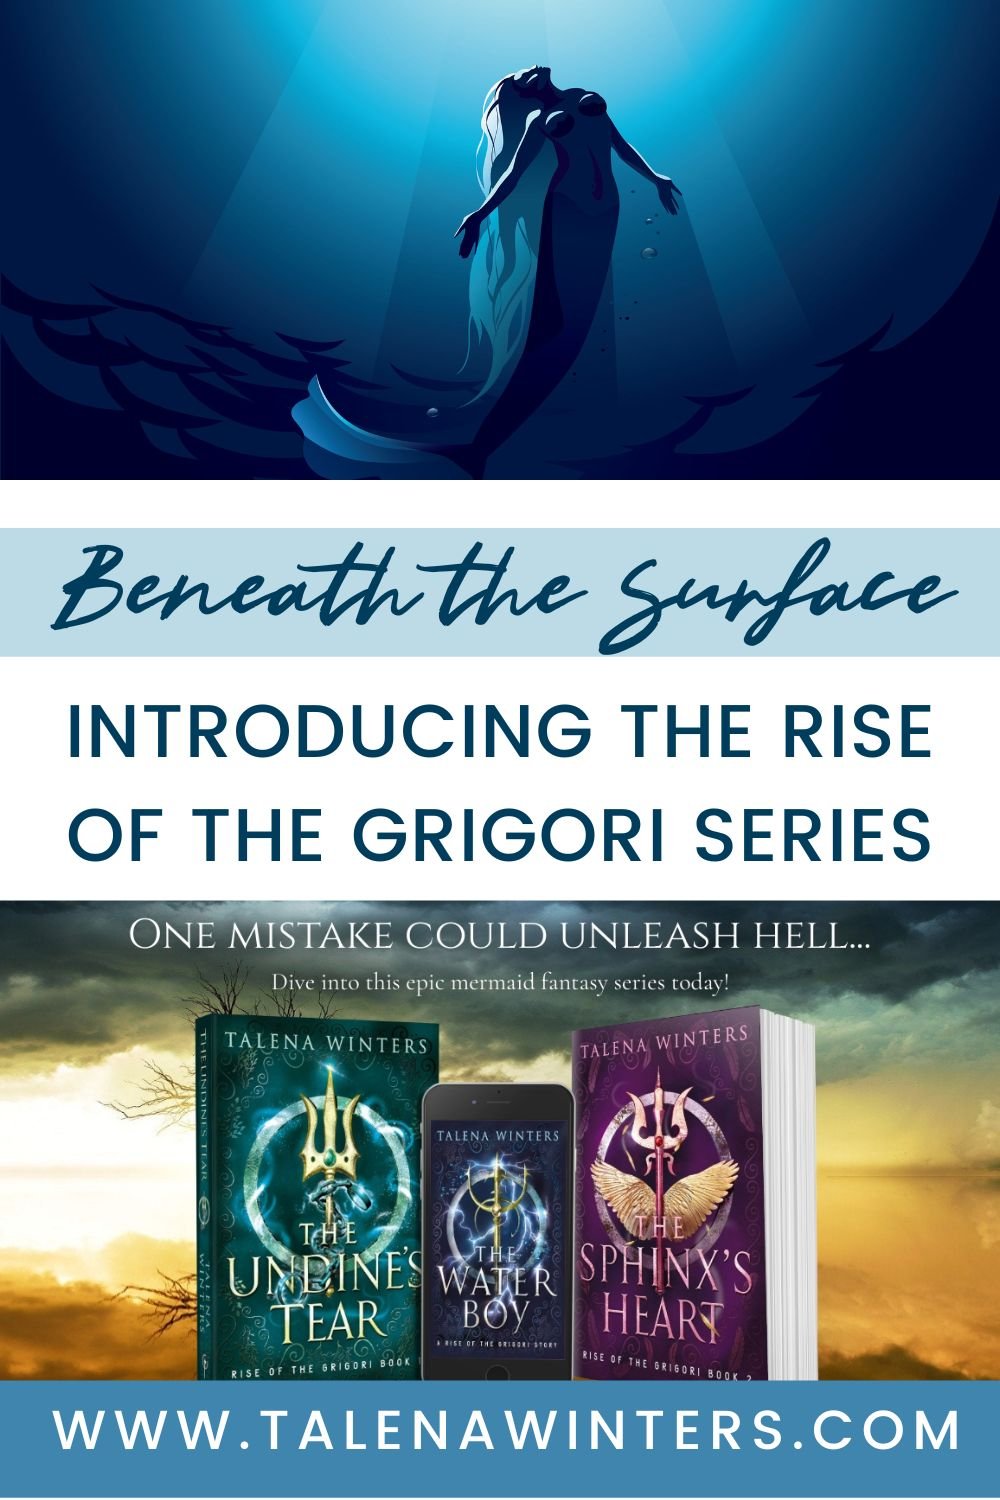 Introducing the Rise of the Grigori Series (Beneath the Surface Book Tour Episode 1)